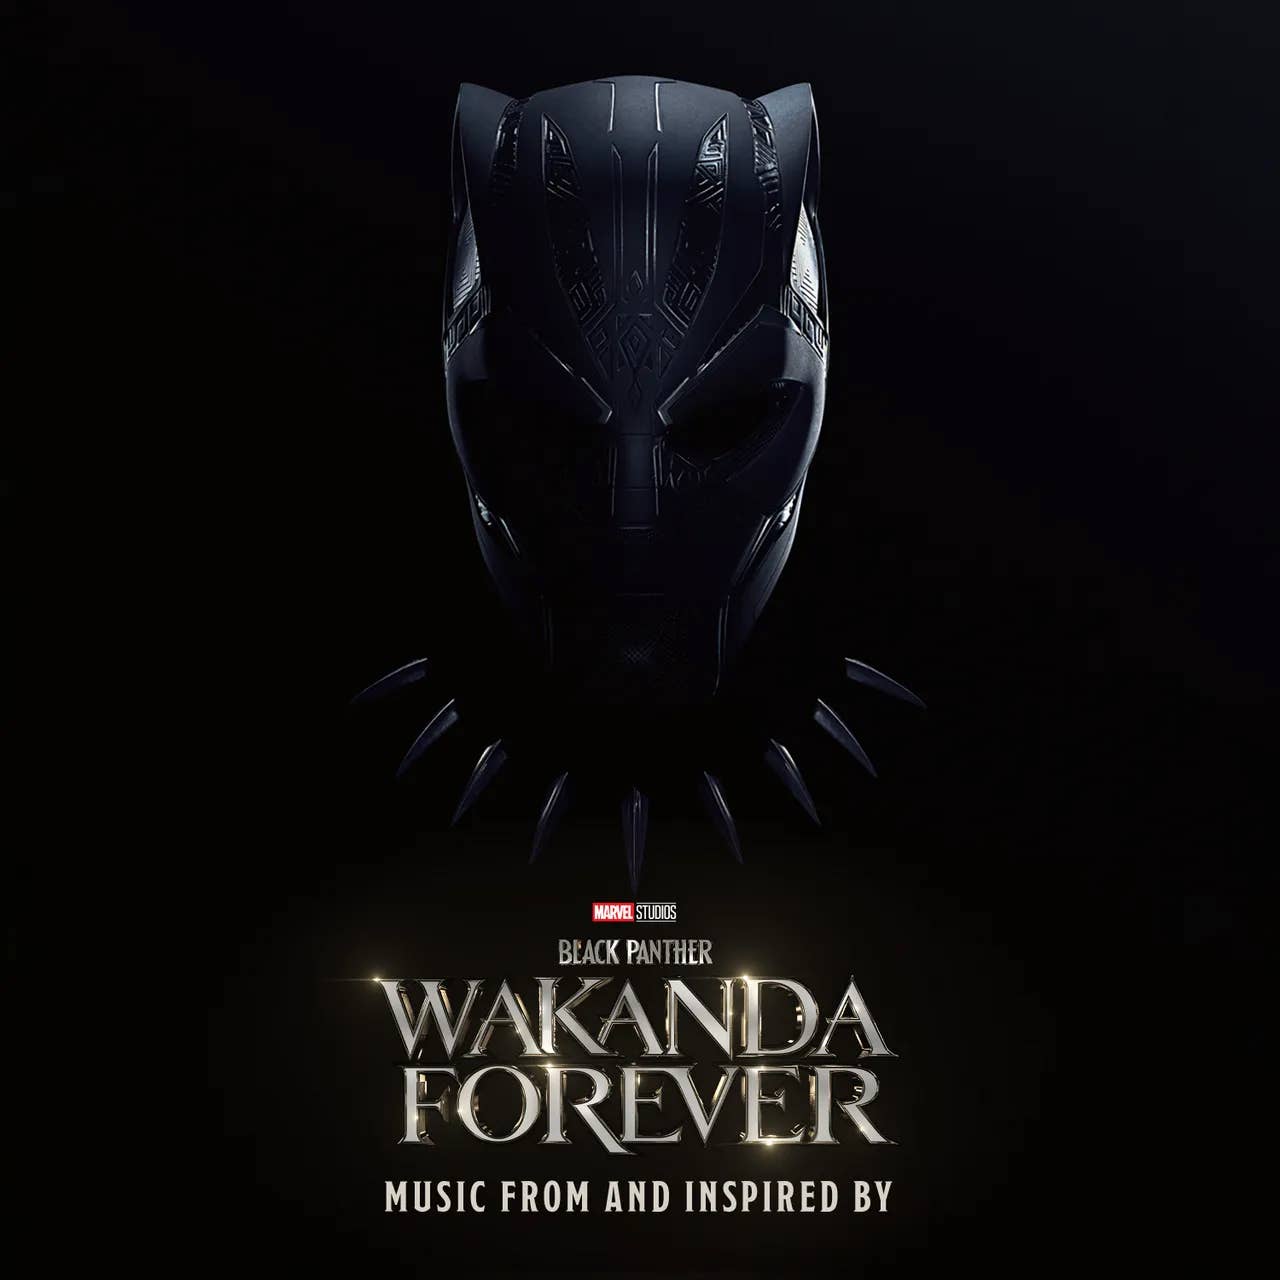 The cover art for the 'Wakanda Forever' soundtrack